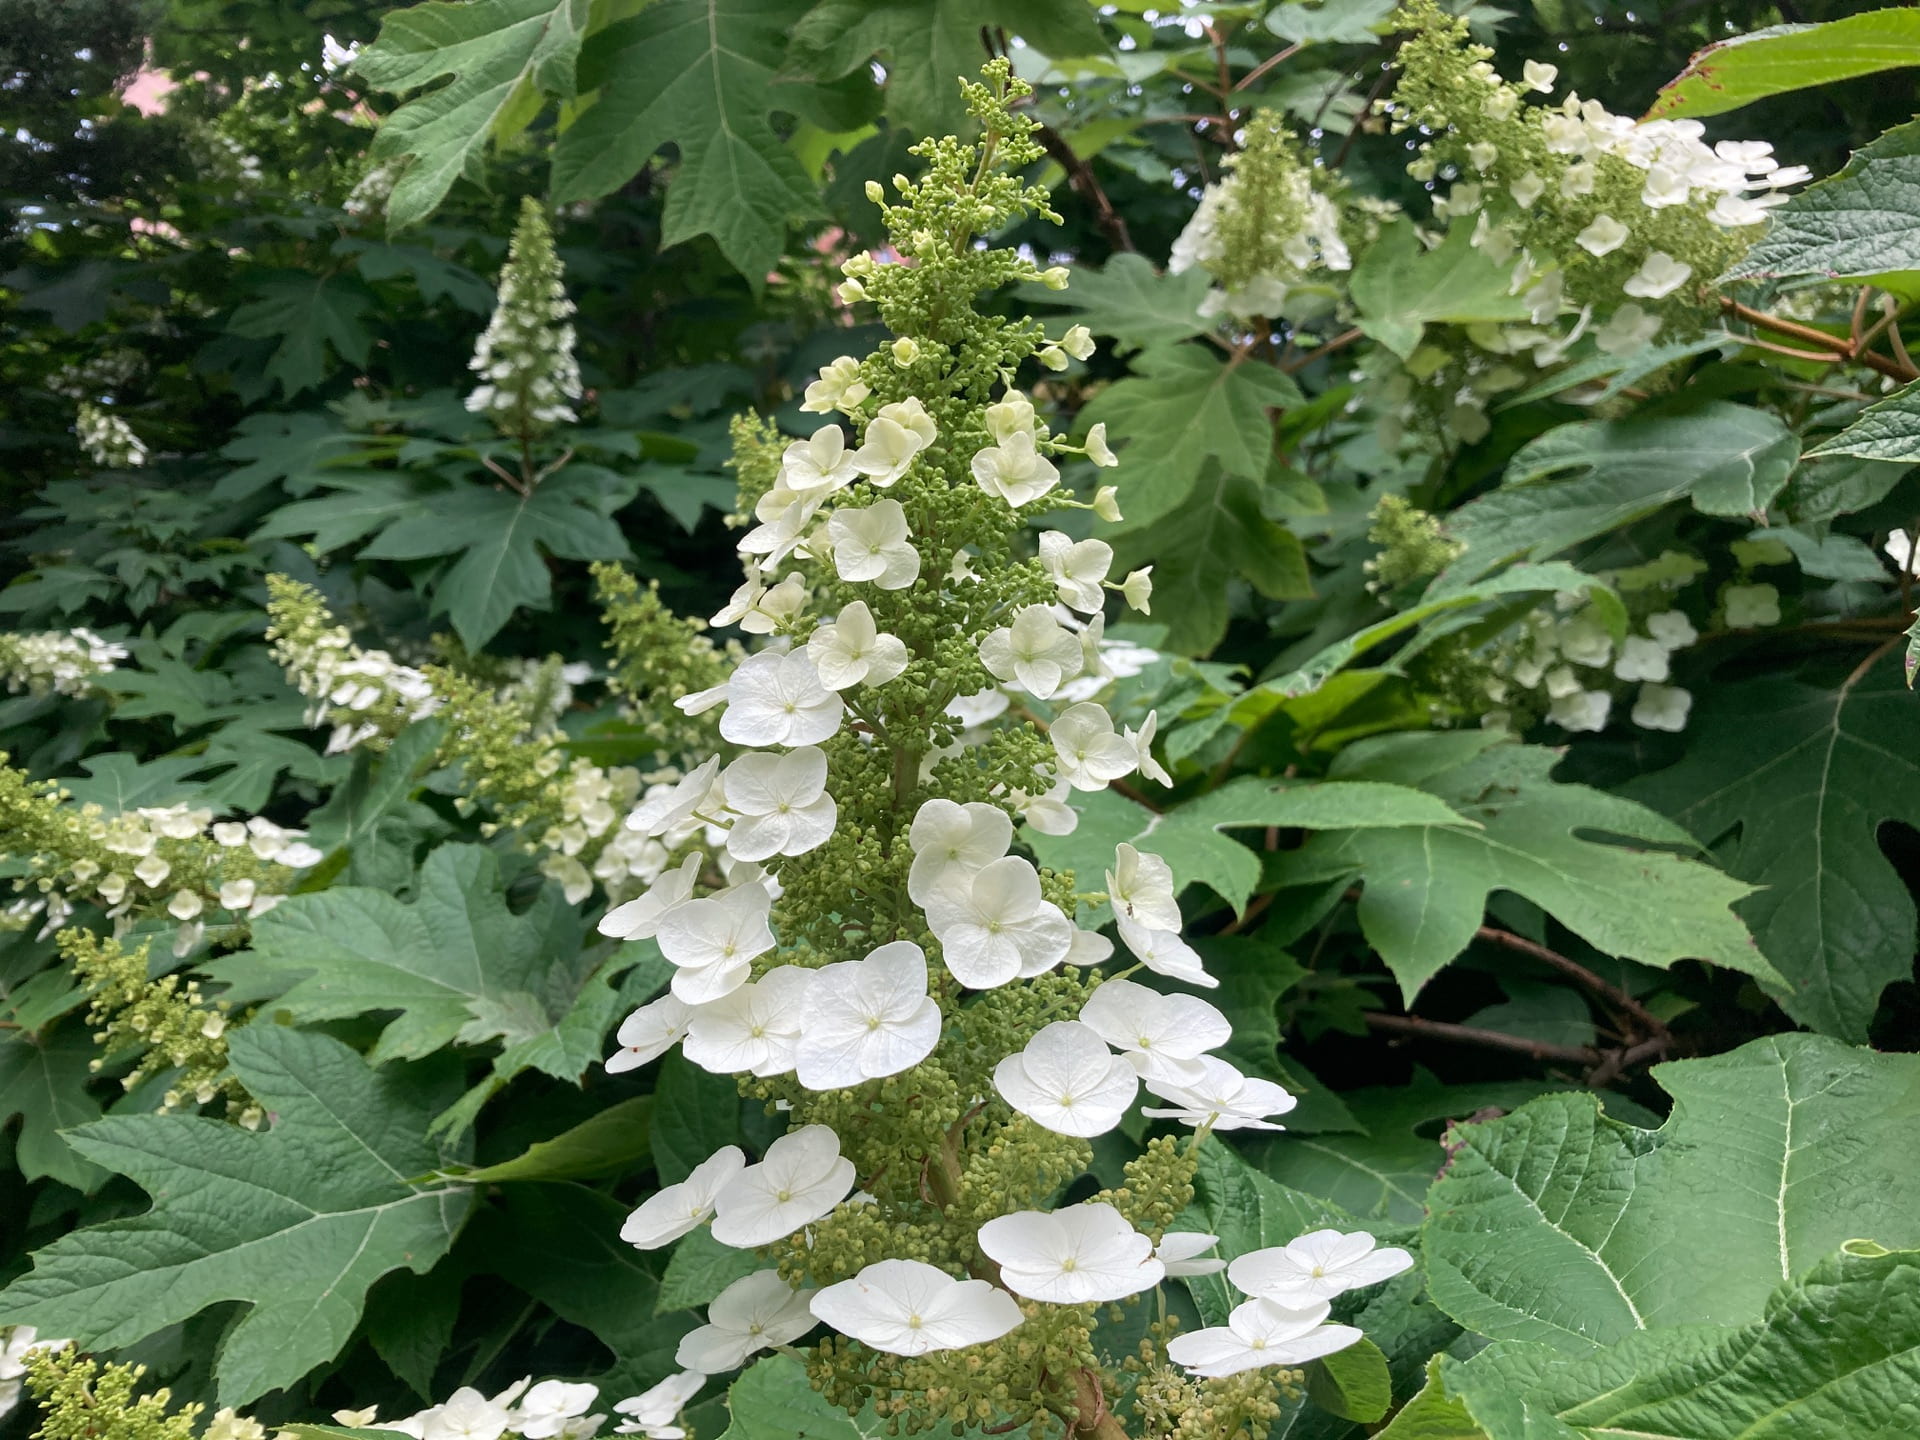 Hydrangea quercifolia begins to bloom, with the bracts (the showy white part) opening around the interior flowers.